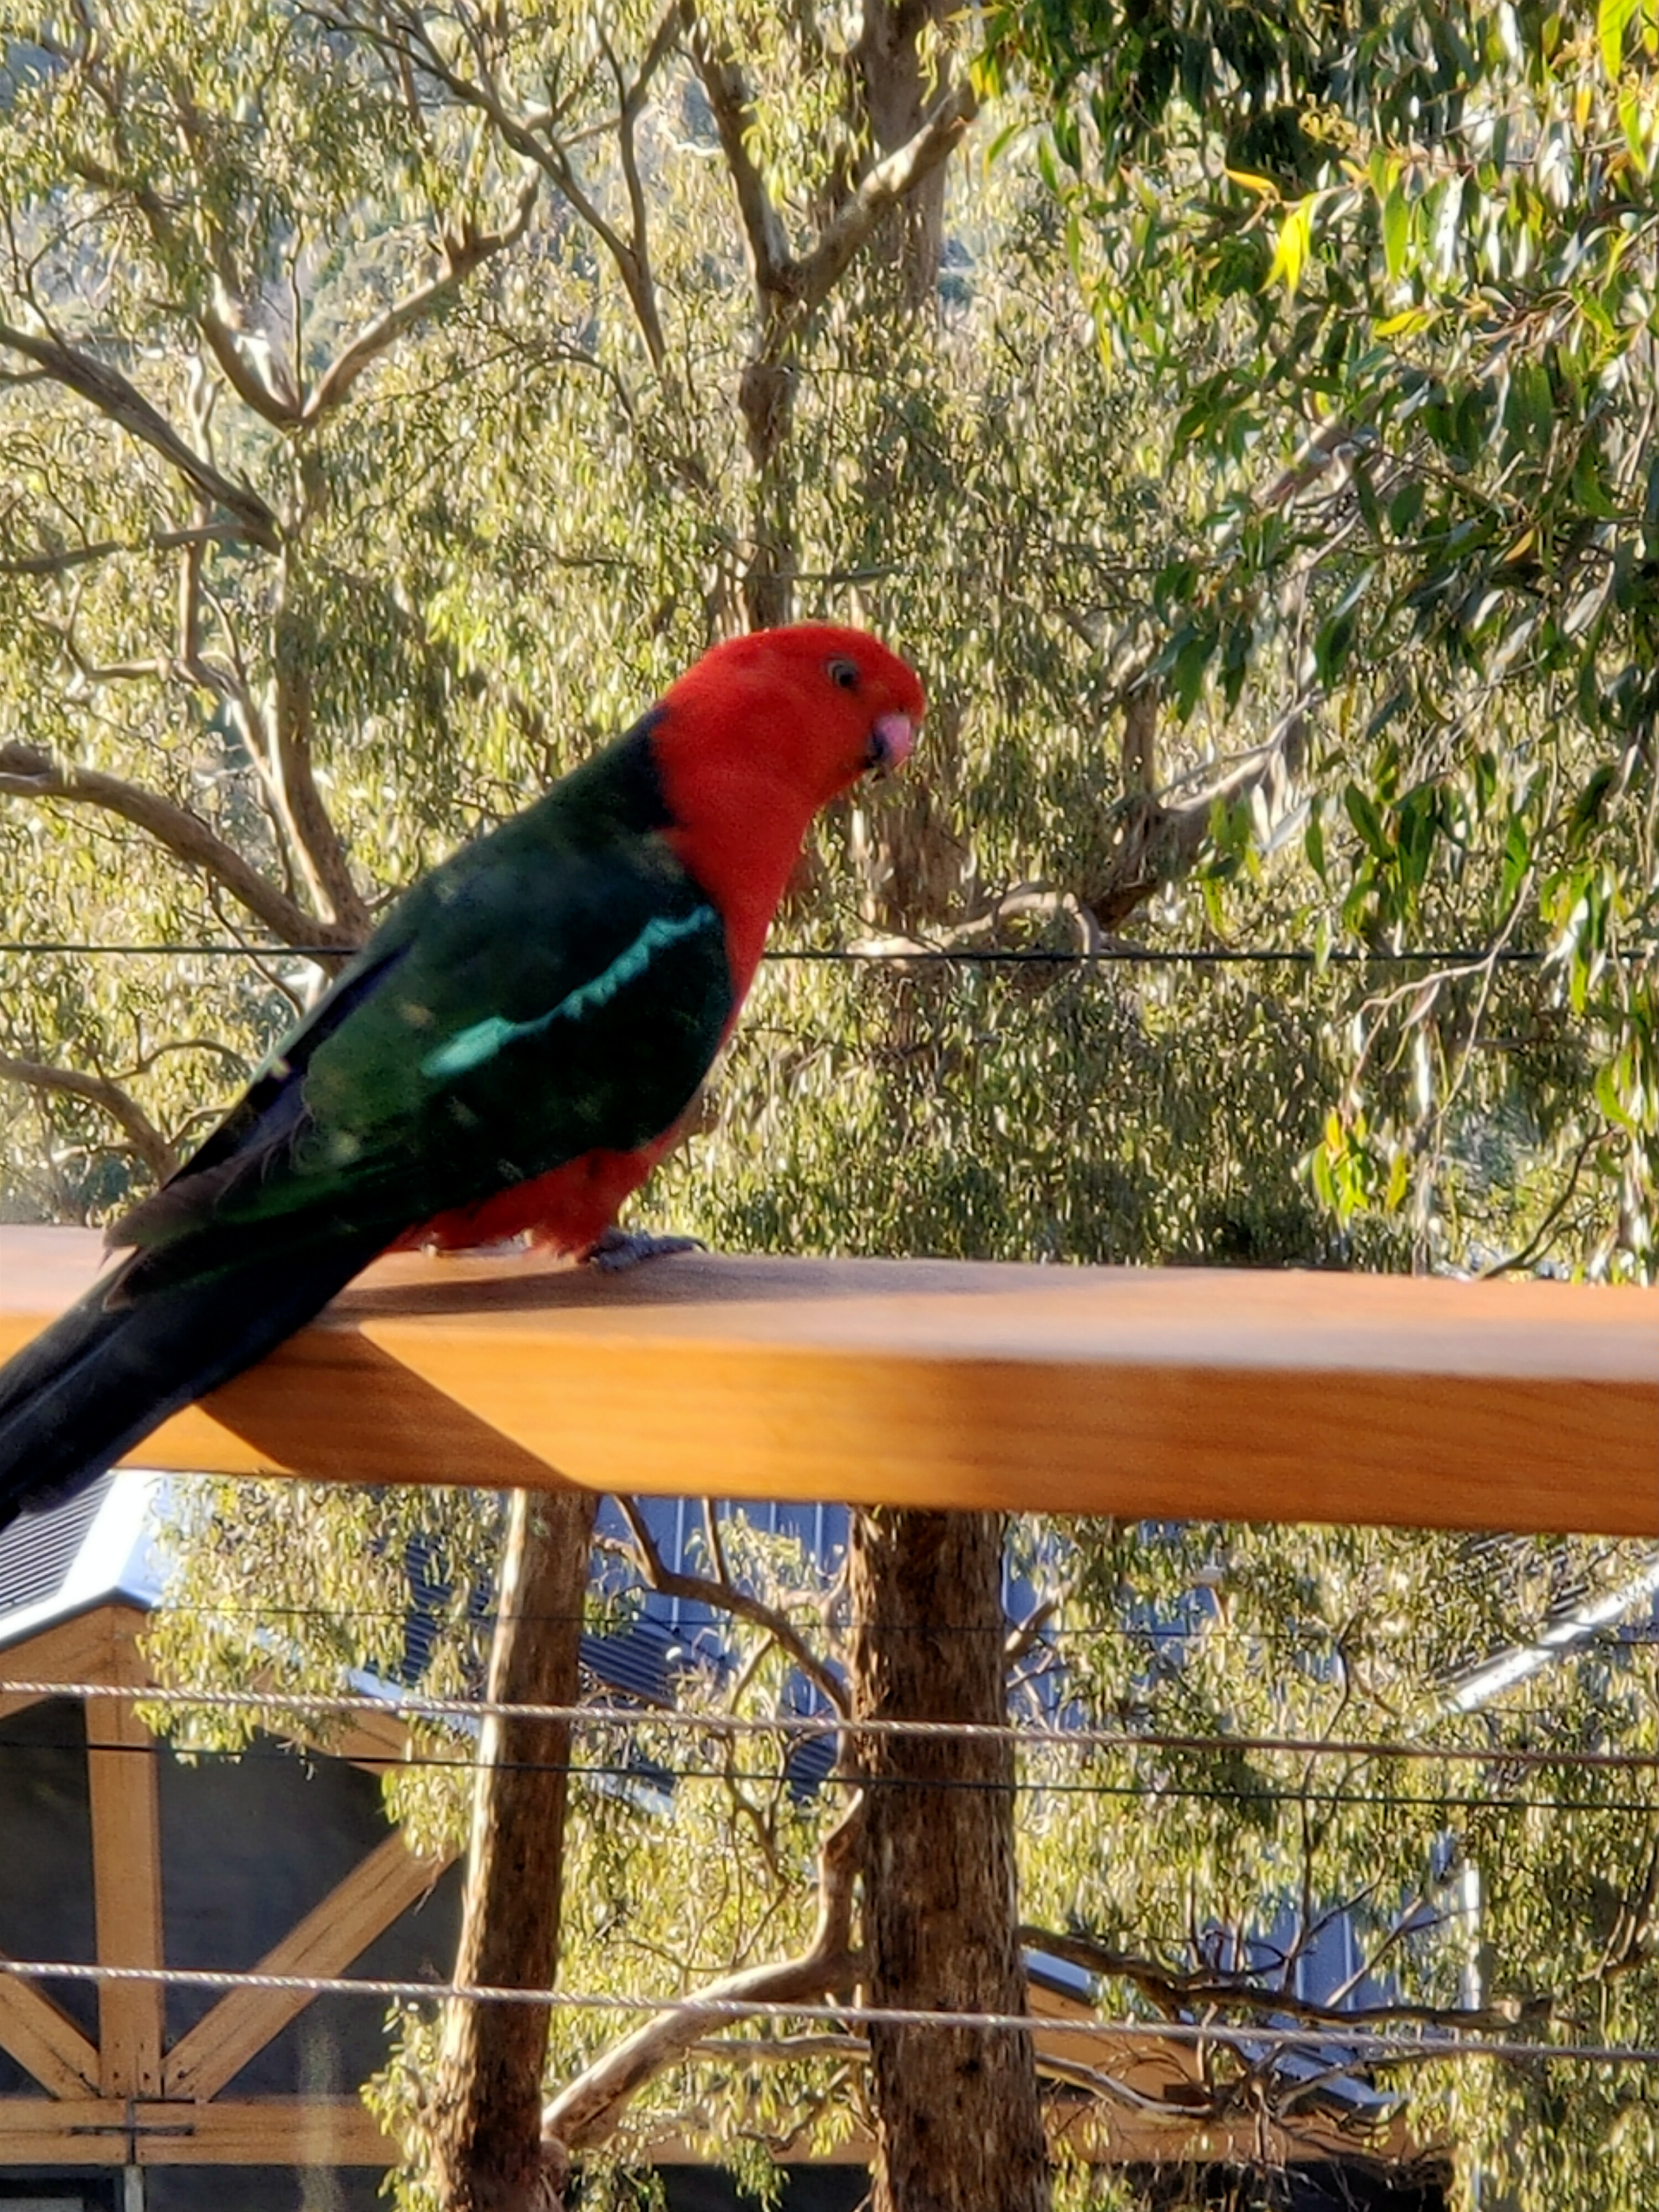 A photo of an Orange King Parrot on my balcony